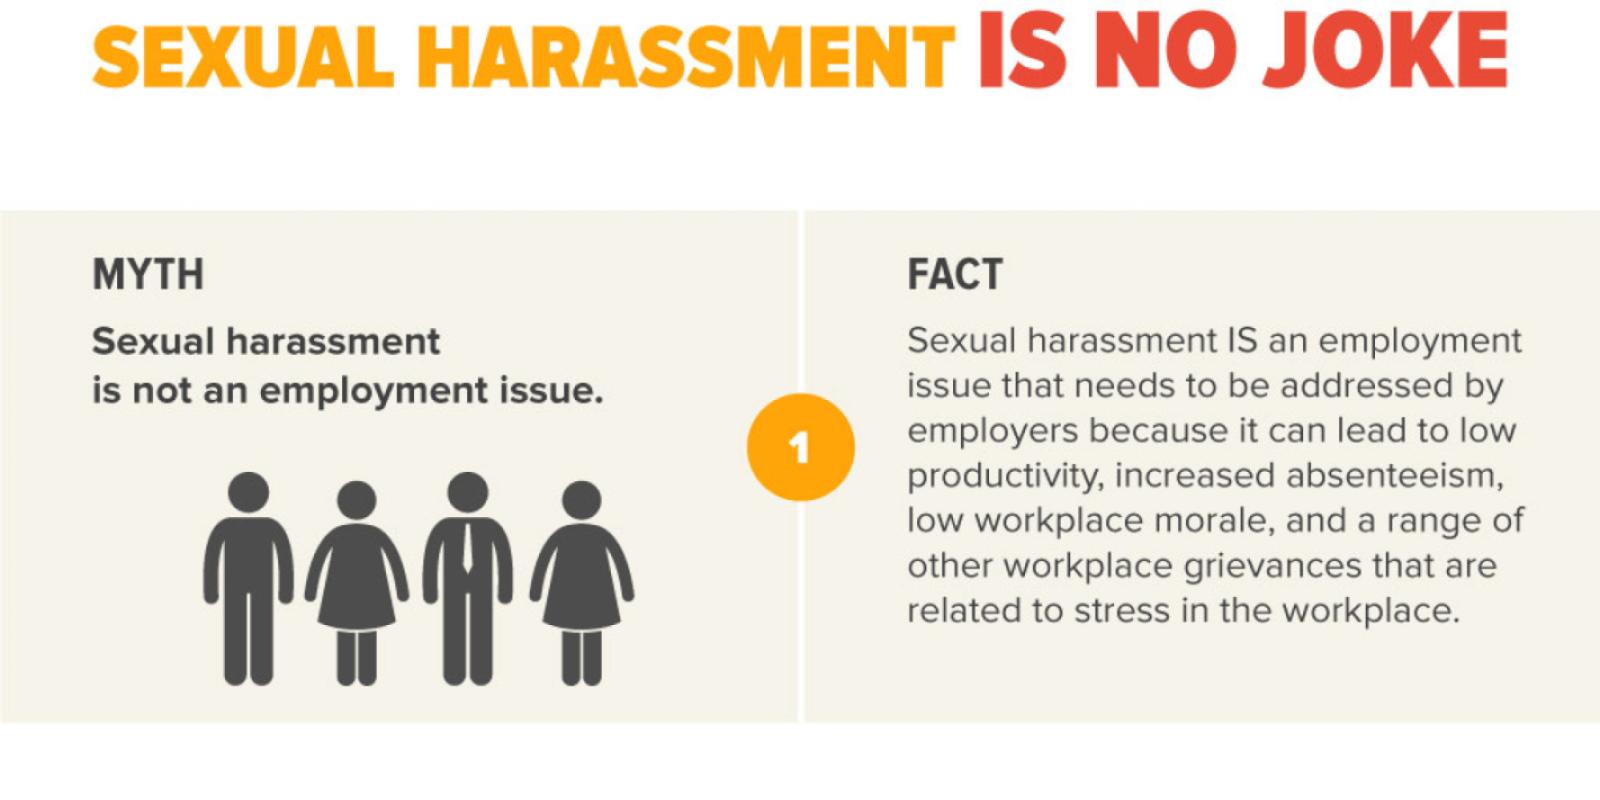 MYTH Sexual harassment is not an employment issue.  FACT Sexual harassment IS an employment issue that needs to be addressed by employers because it can lead to low productivity, increased absenteeism, low workplace morale, and a range of other workplace grievances that are related to stress in the workplace.